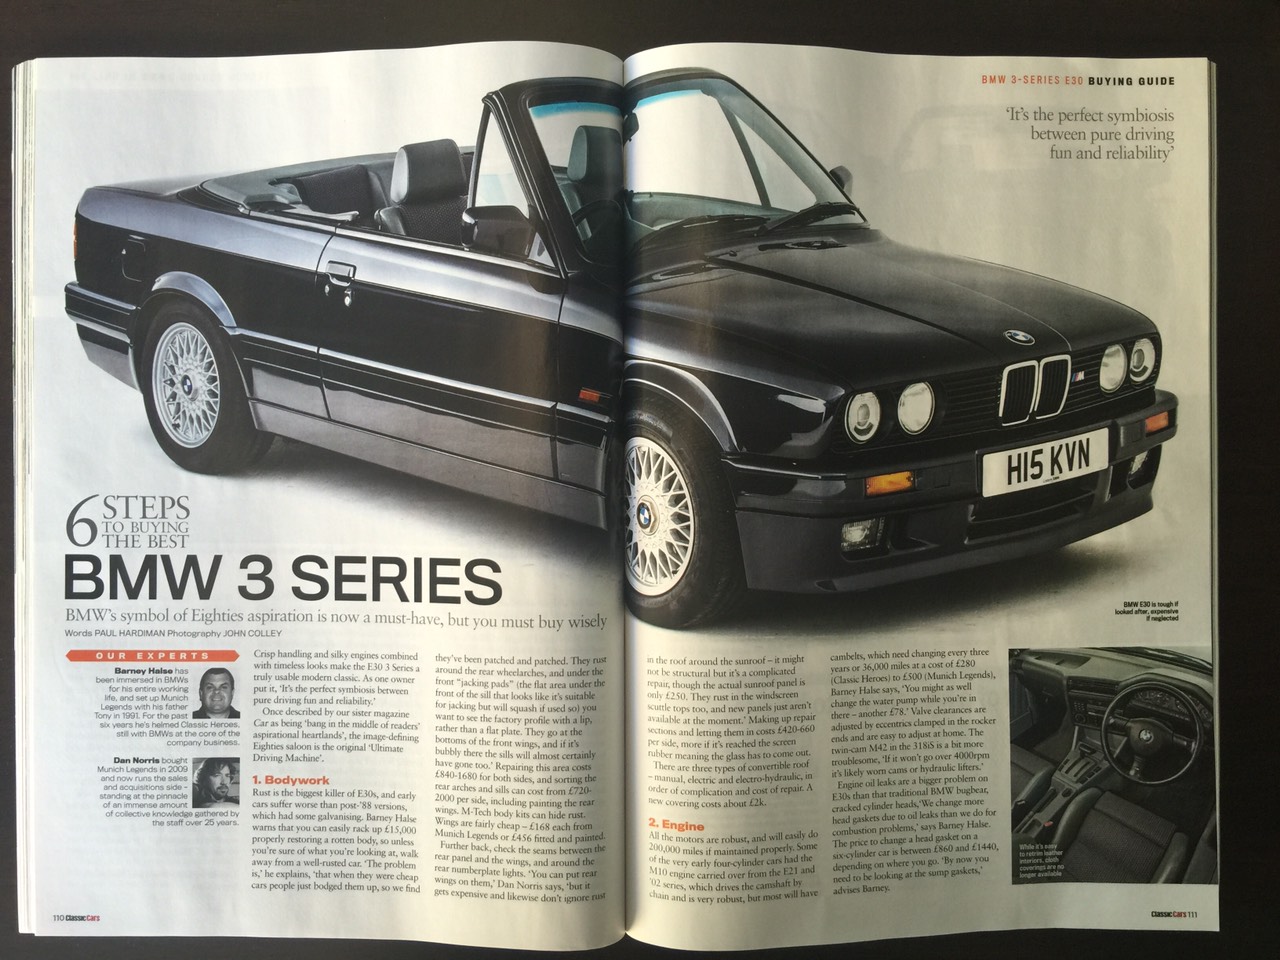 BMW E30 Buying Guide